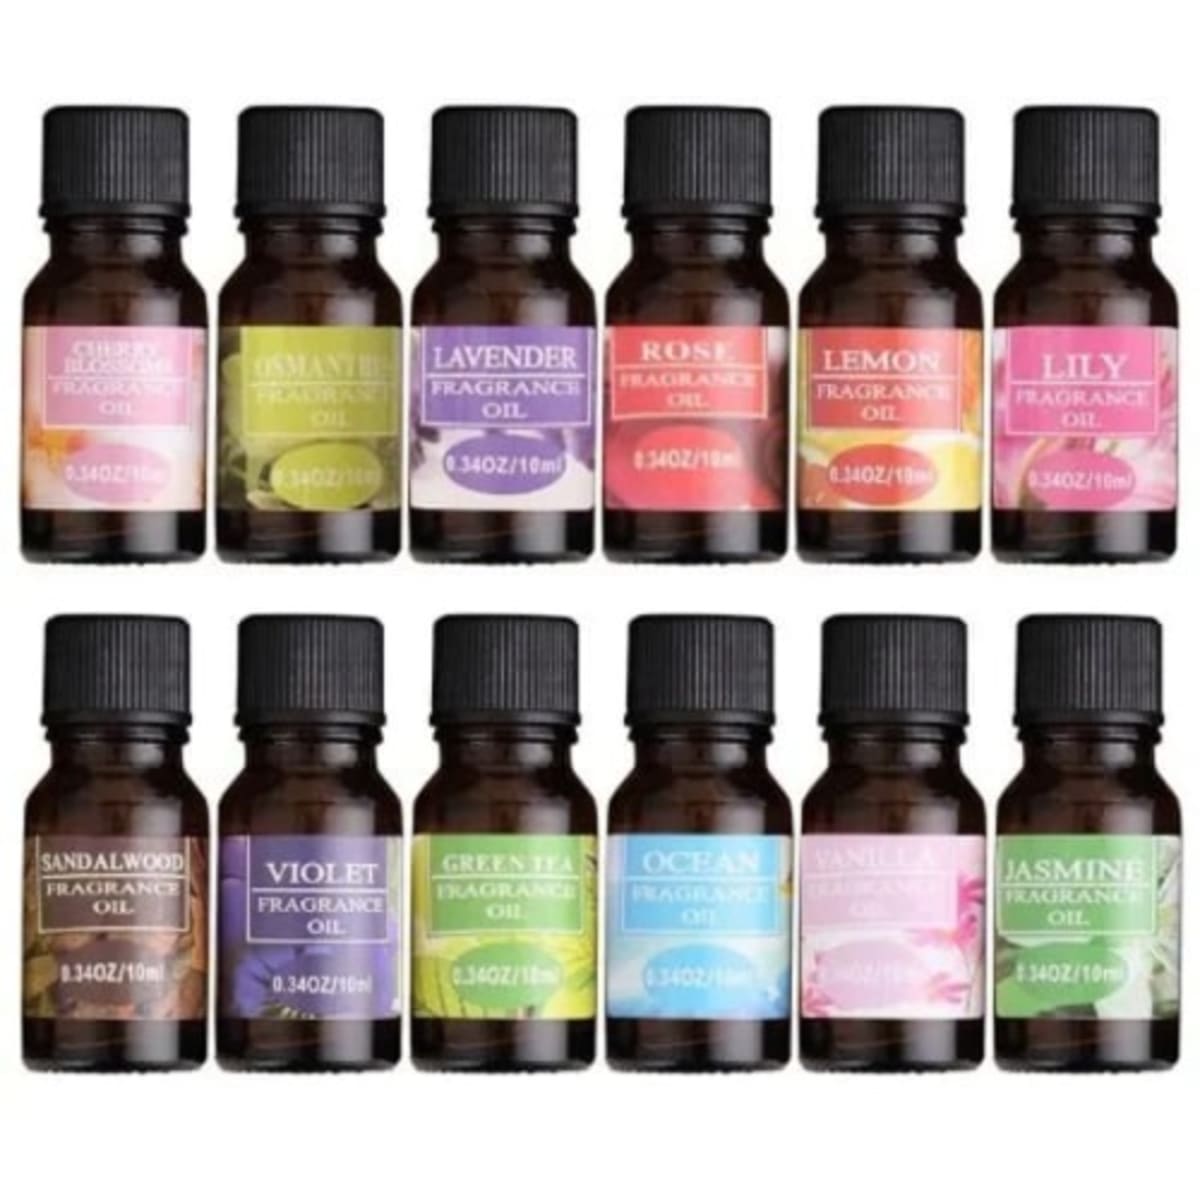 10ml Pure Essential Oil for Diffuser, Humidifier, Aromatherapy